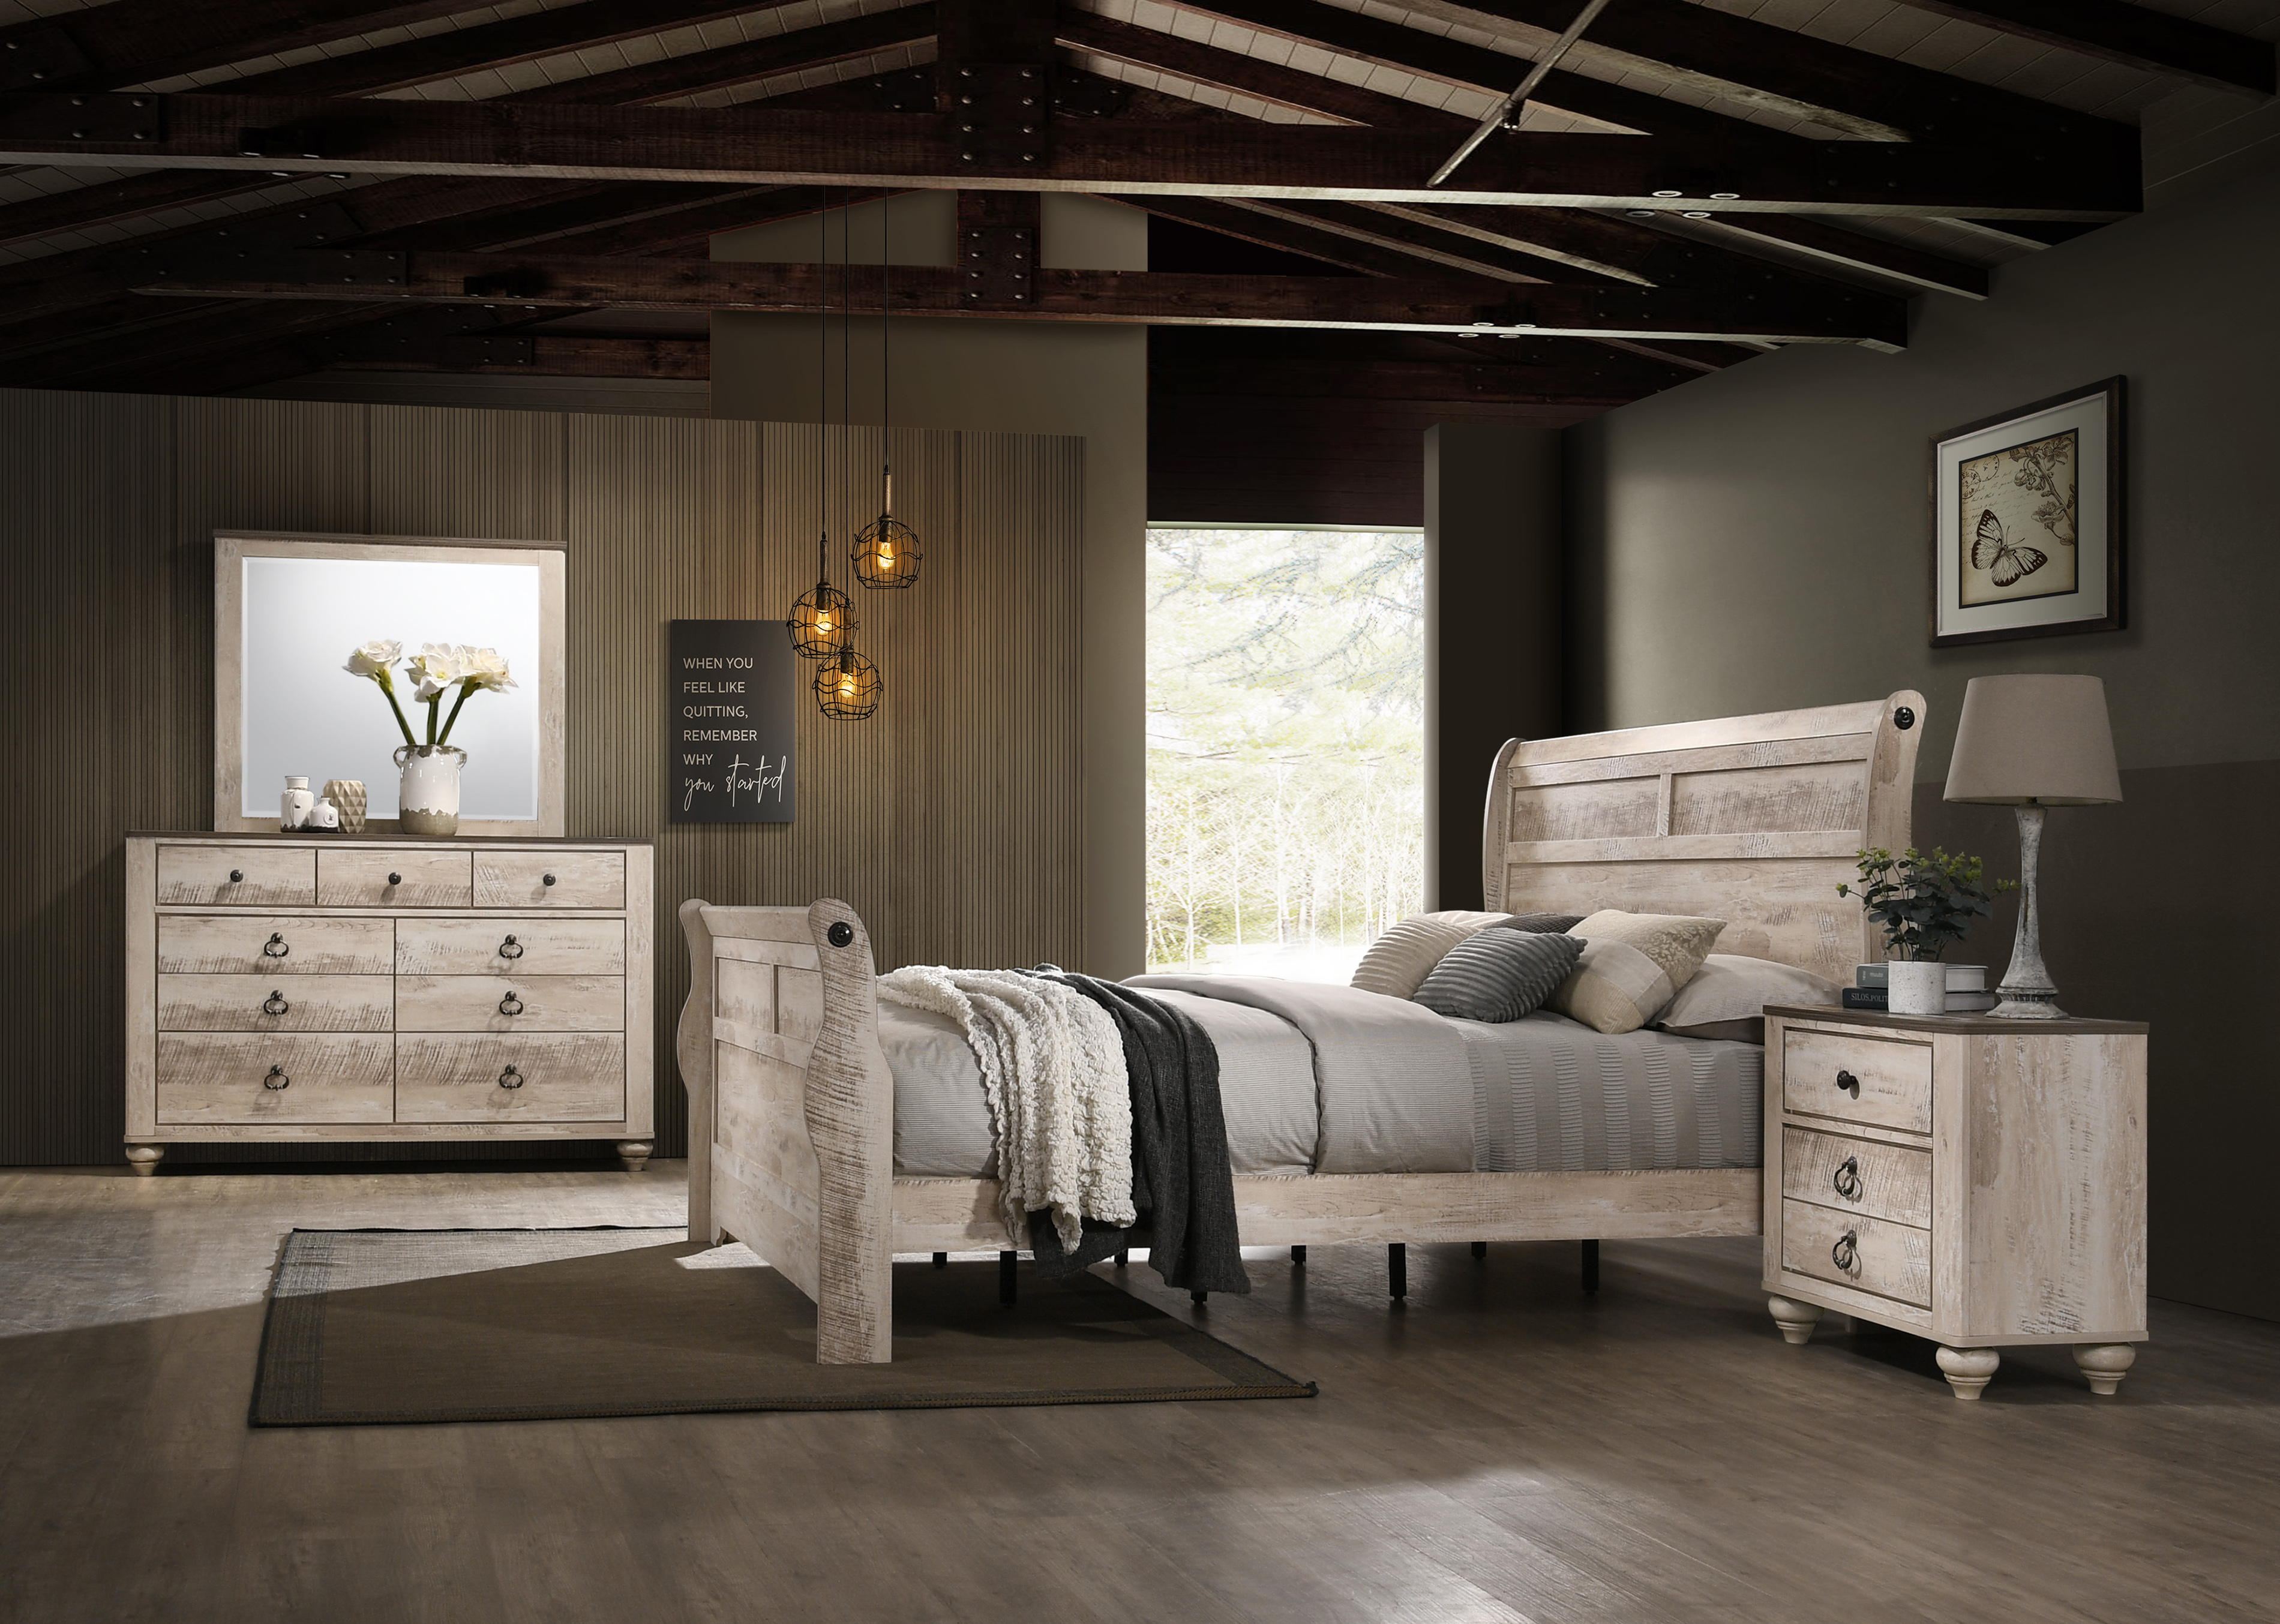 Imerland Contemporary White Wash Finish Bedroom Set with Queen Sleigh Bed, Dresser, Mirror, Two Nightstands - image 2 of 11